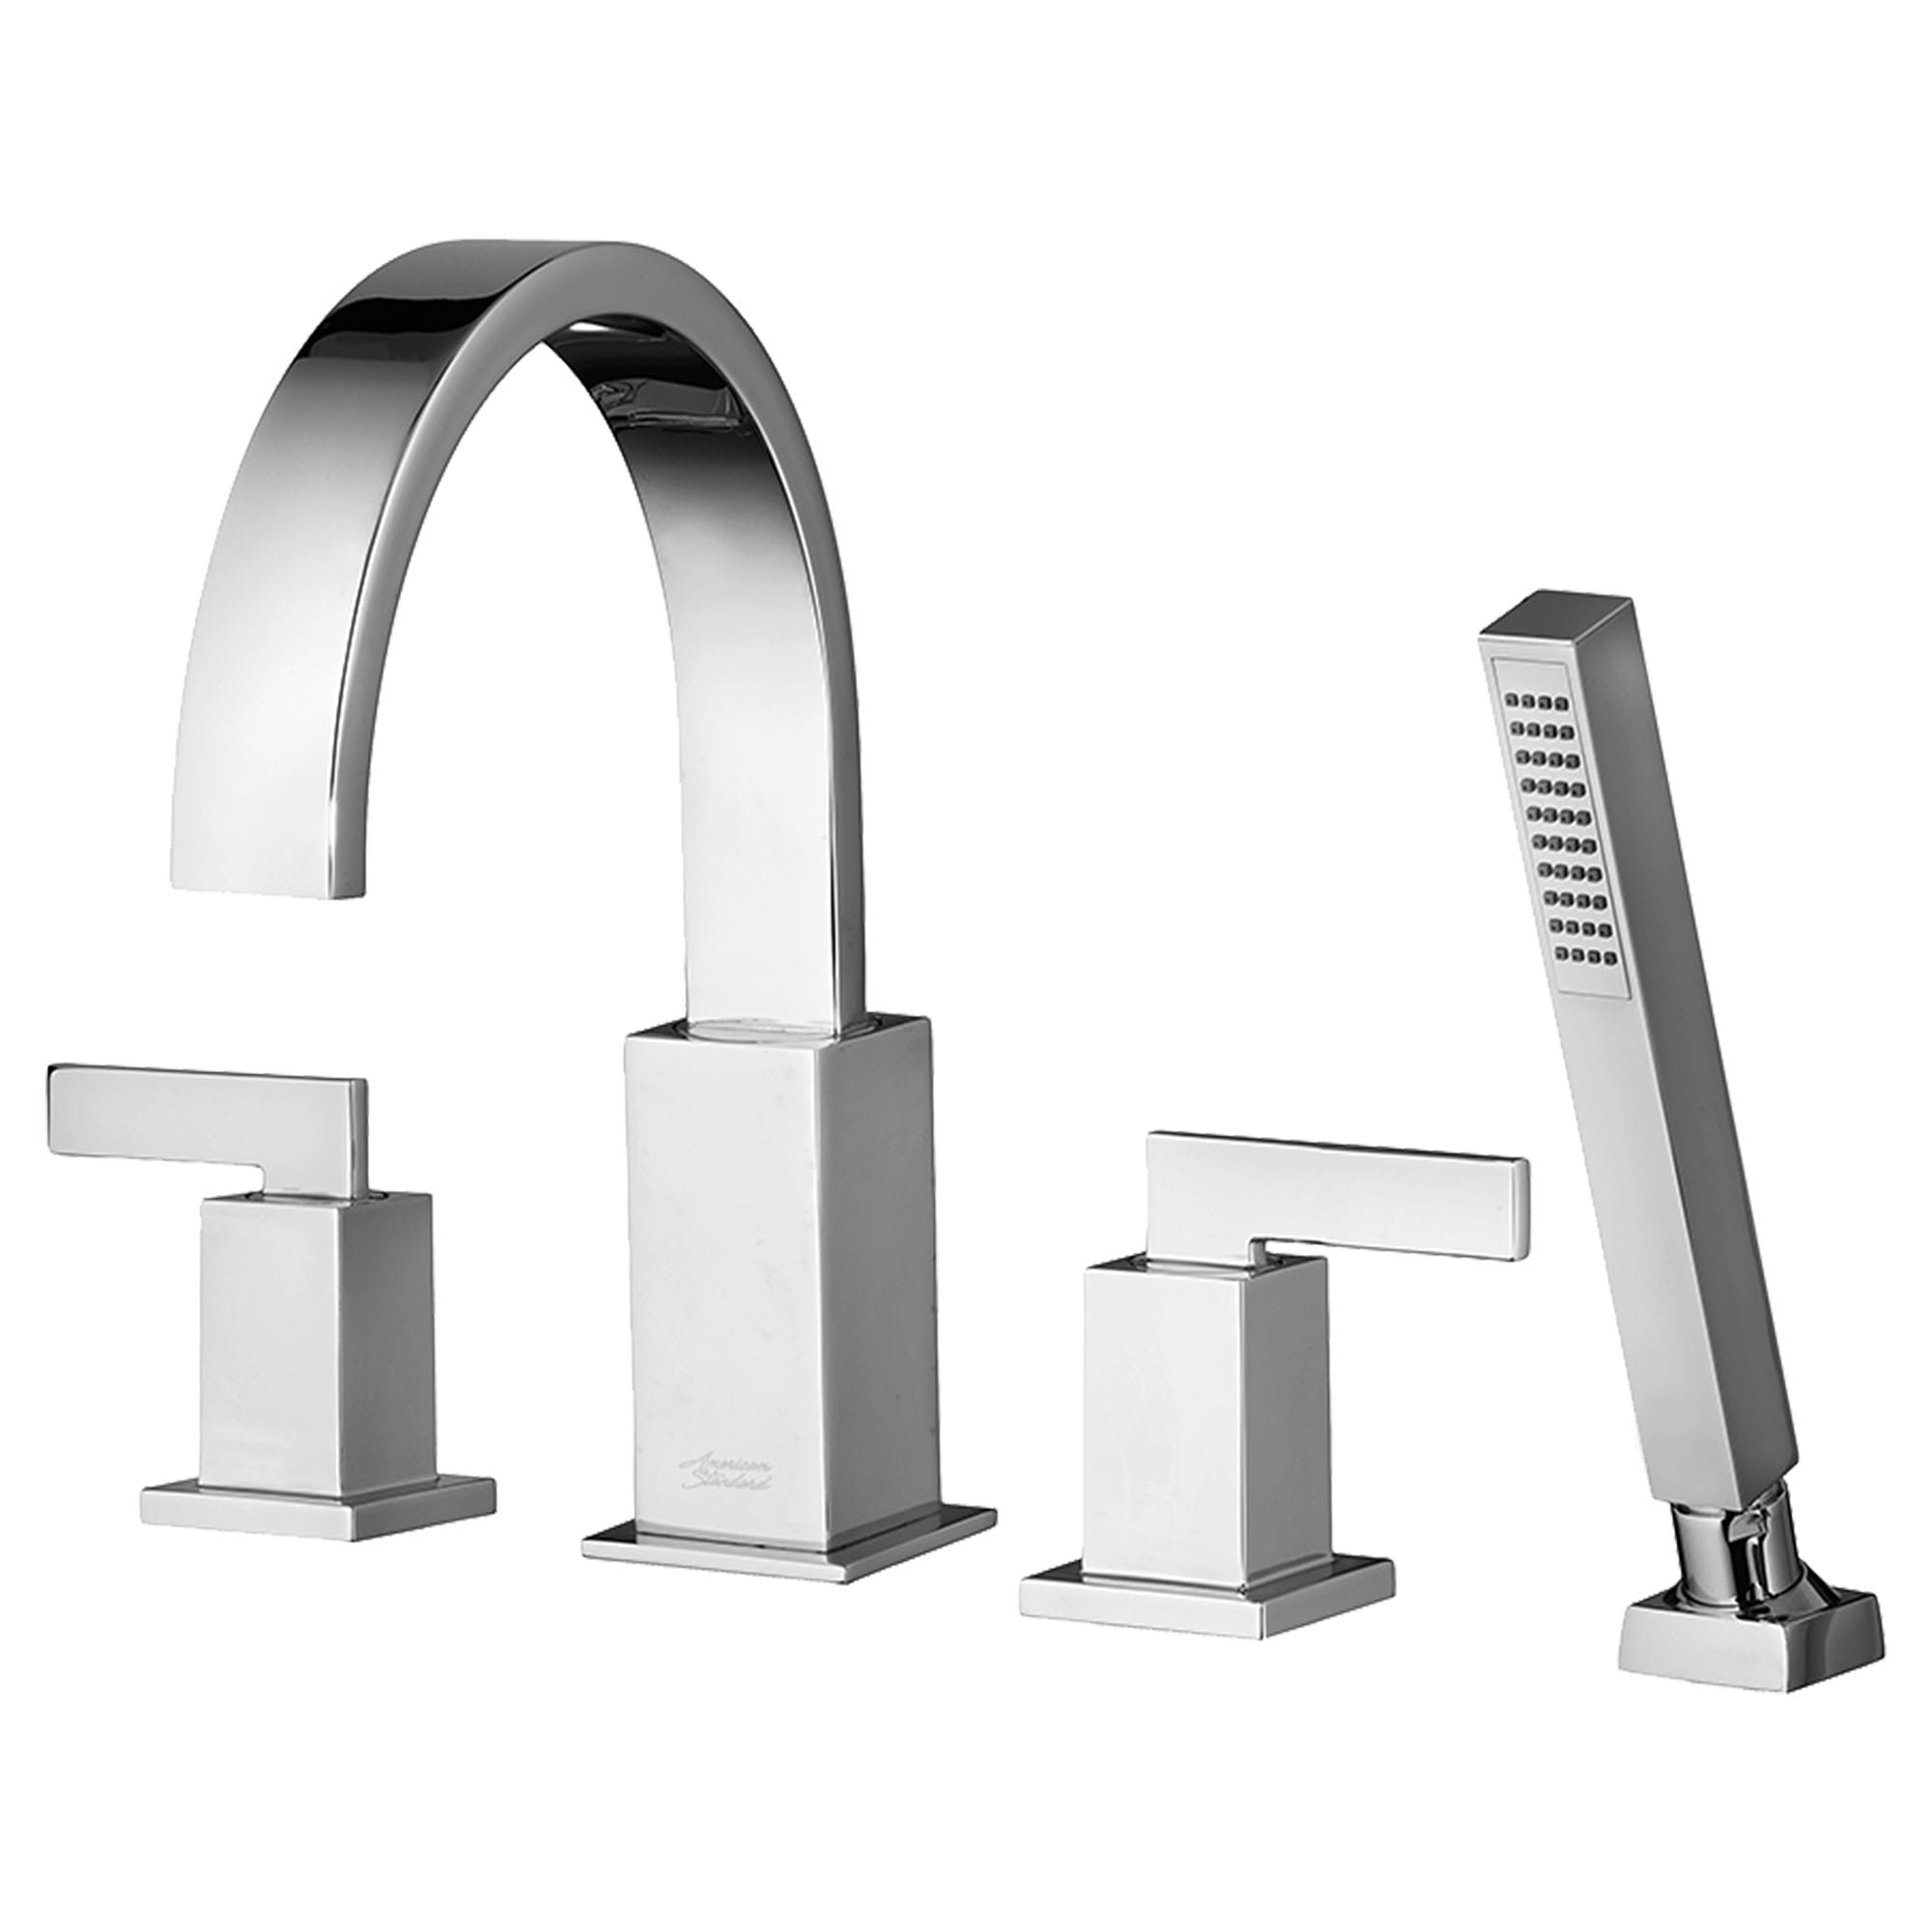 Time Square® Bathtub Faucet With Lever Handles and Personal Shower for Flash® Rough-In Valve